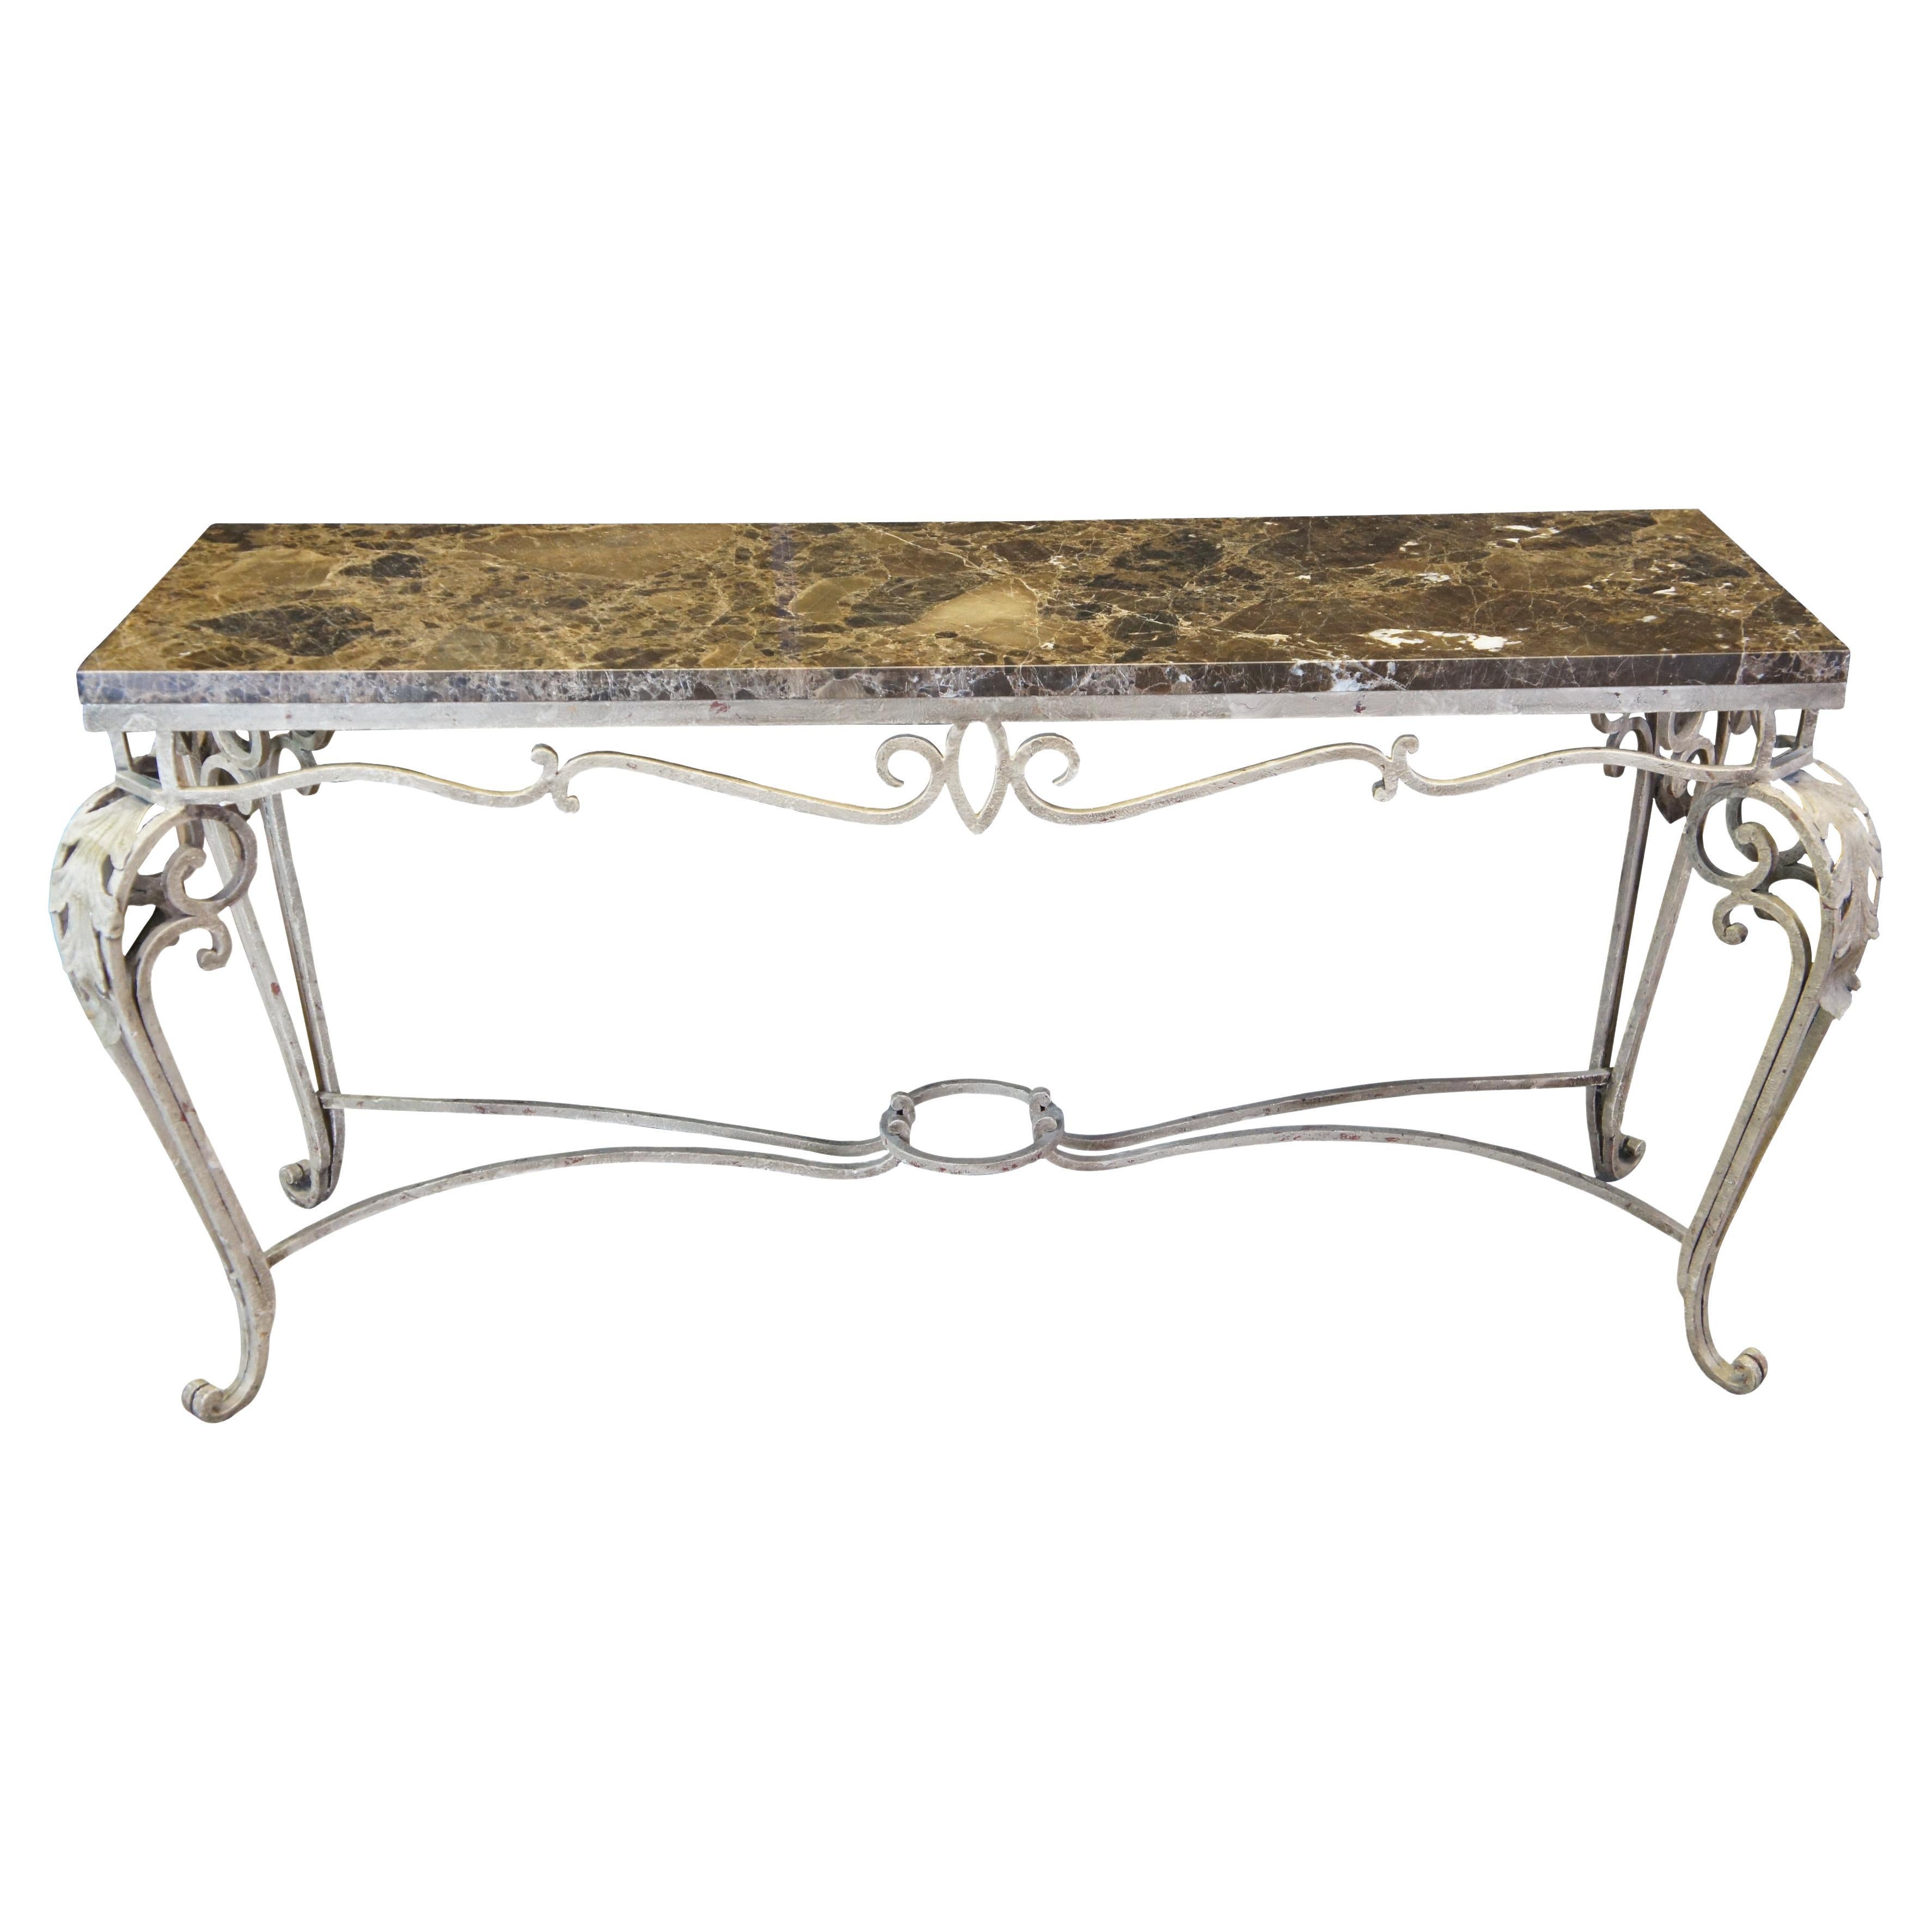 Vintage Scrolled Wrought Iron & Spanish Marble Hall Sofa Console Table 65" For Sale